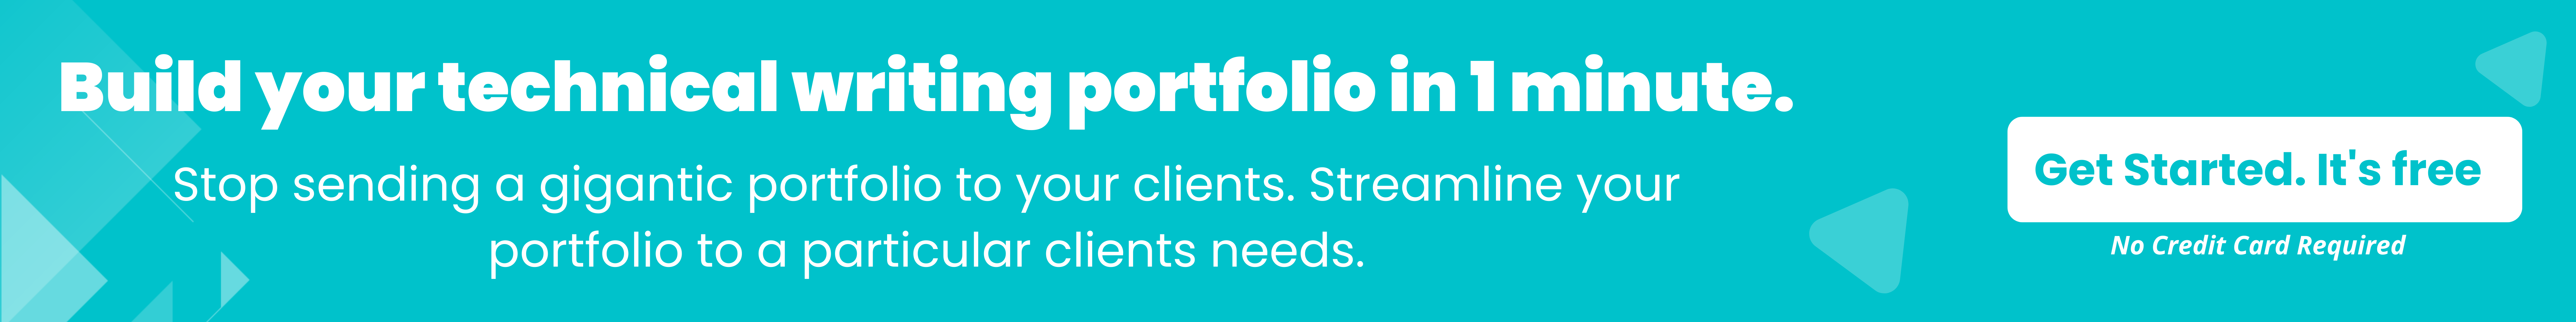 Build your technical writing portfolio in 1 minute.